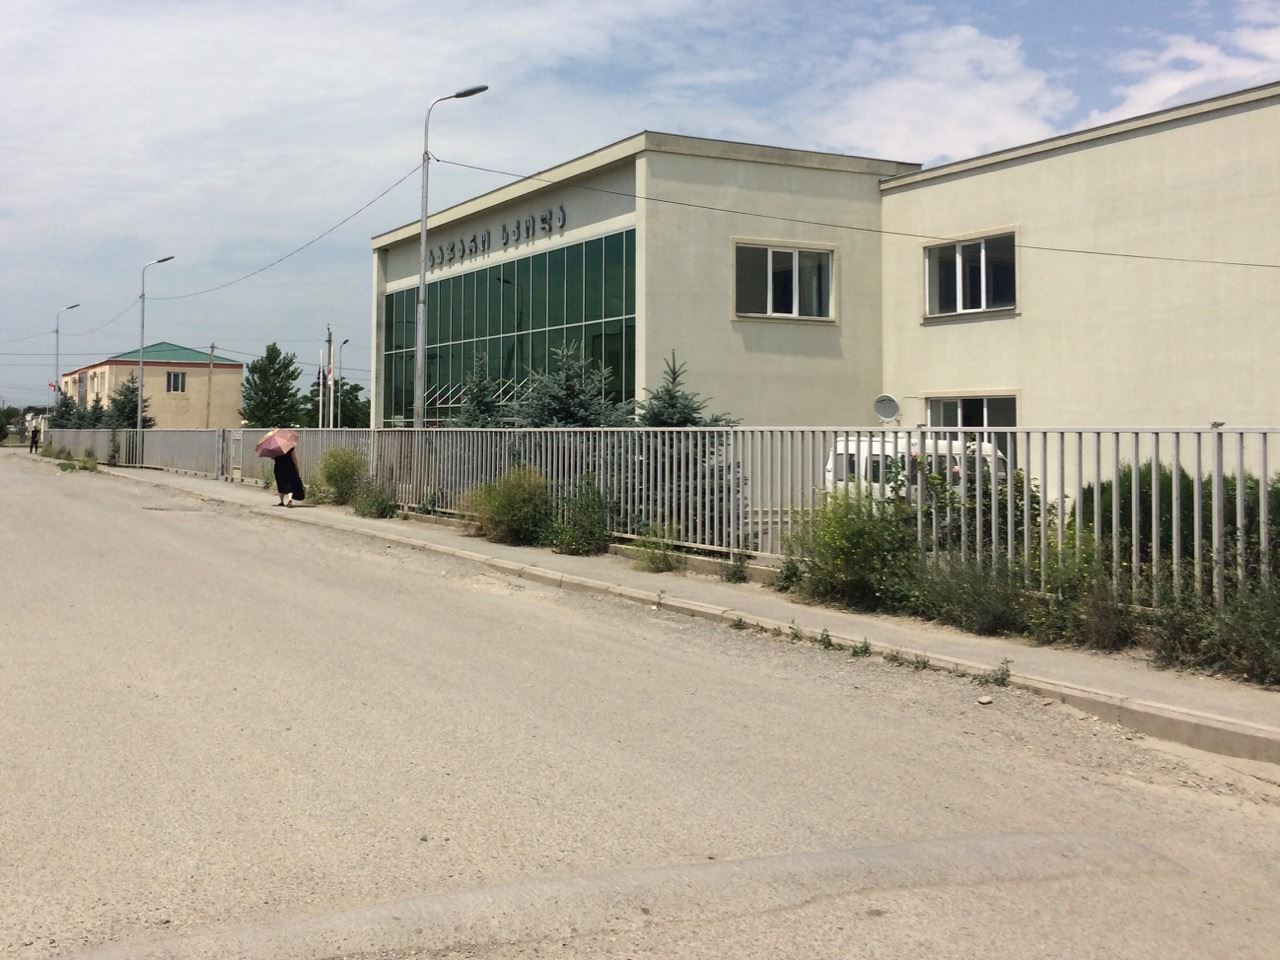 Primary school in Tserovani - 10 years after the re-settlement